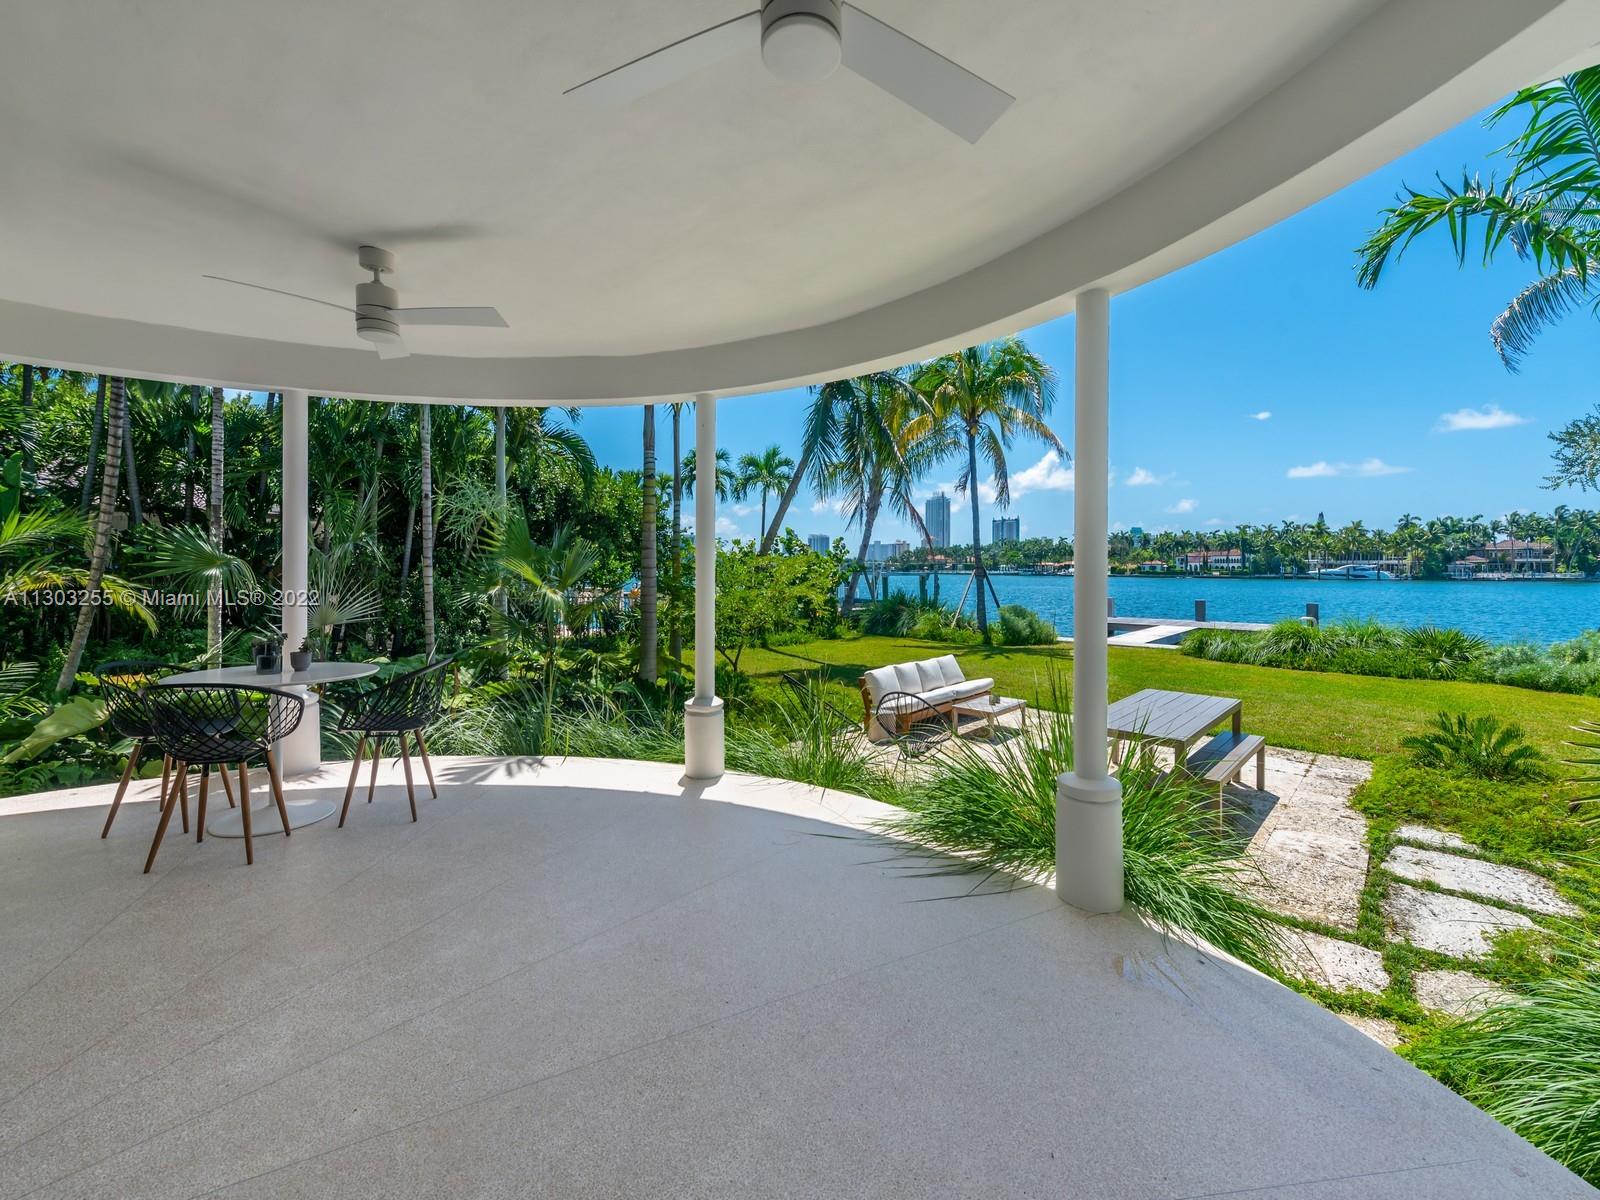 Amazing development opportunity. Enjoy a beautiful newly renovated waterfront home nestled on the quiet side of Normandy Isles in Miami Beach while you design your dream home. Boasting 85 ft of waterfrontage this oversized 15,000 sq foot property offers unobstructed wide water bay views of La Gorce Island and the Miami skyline. New teak dock and elevated seawall. Located minutes from houses of worship, shops, and restaurants.